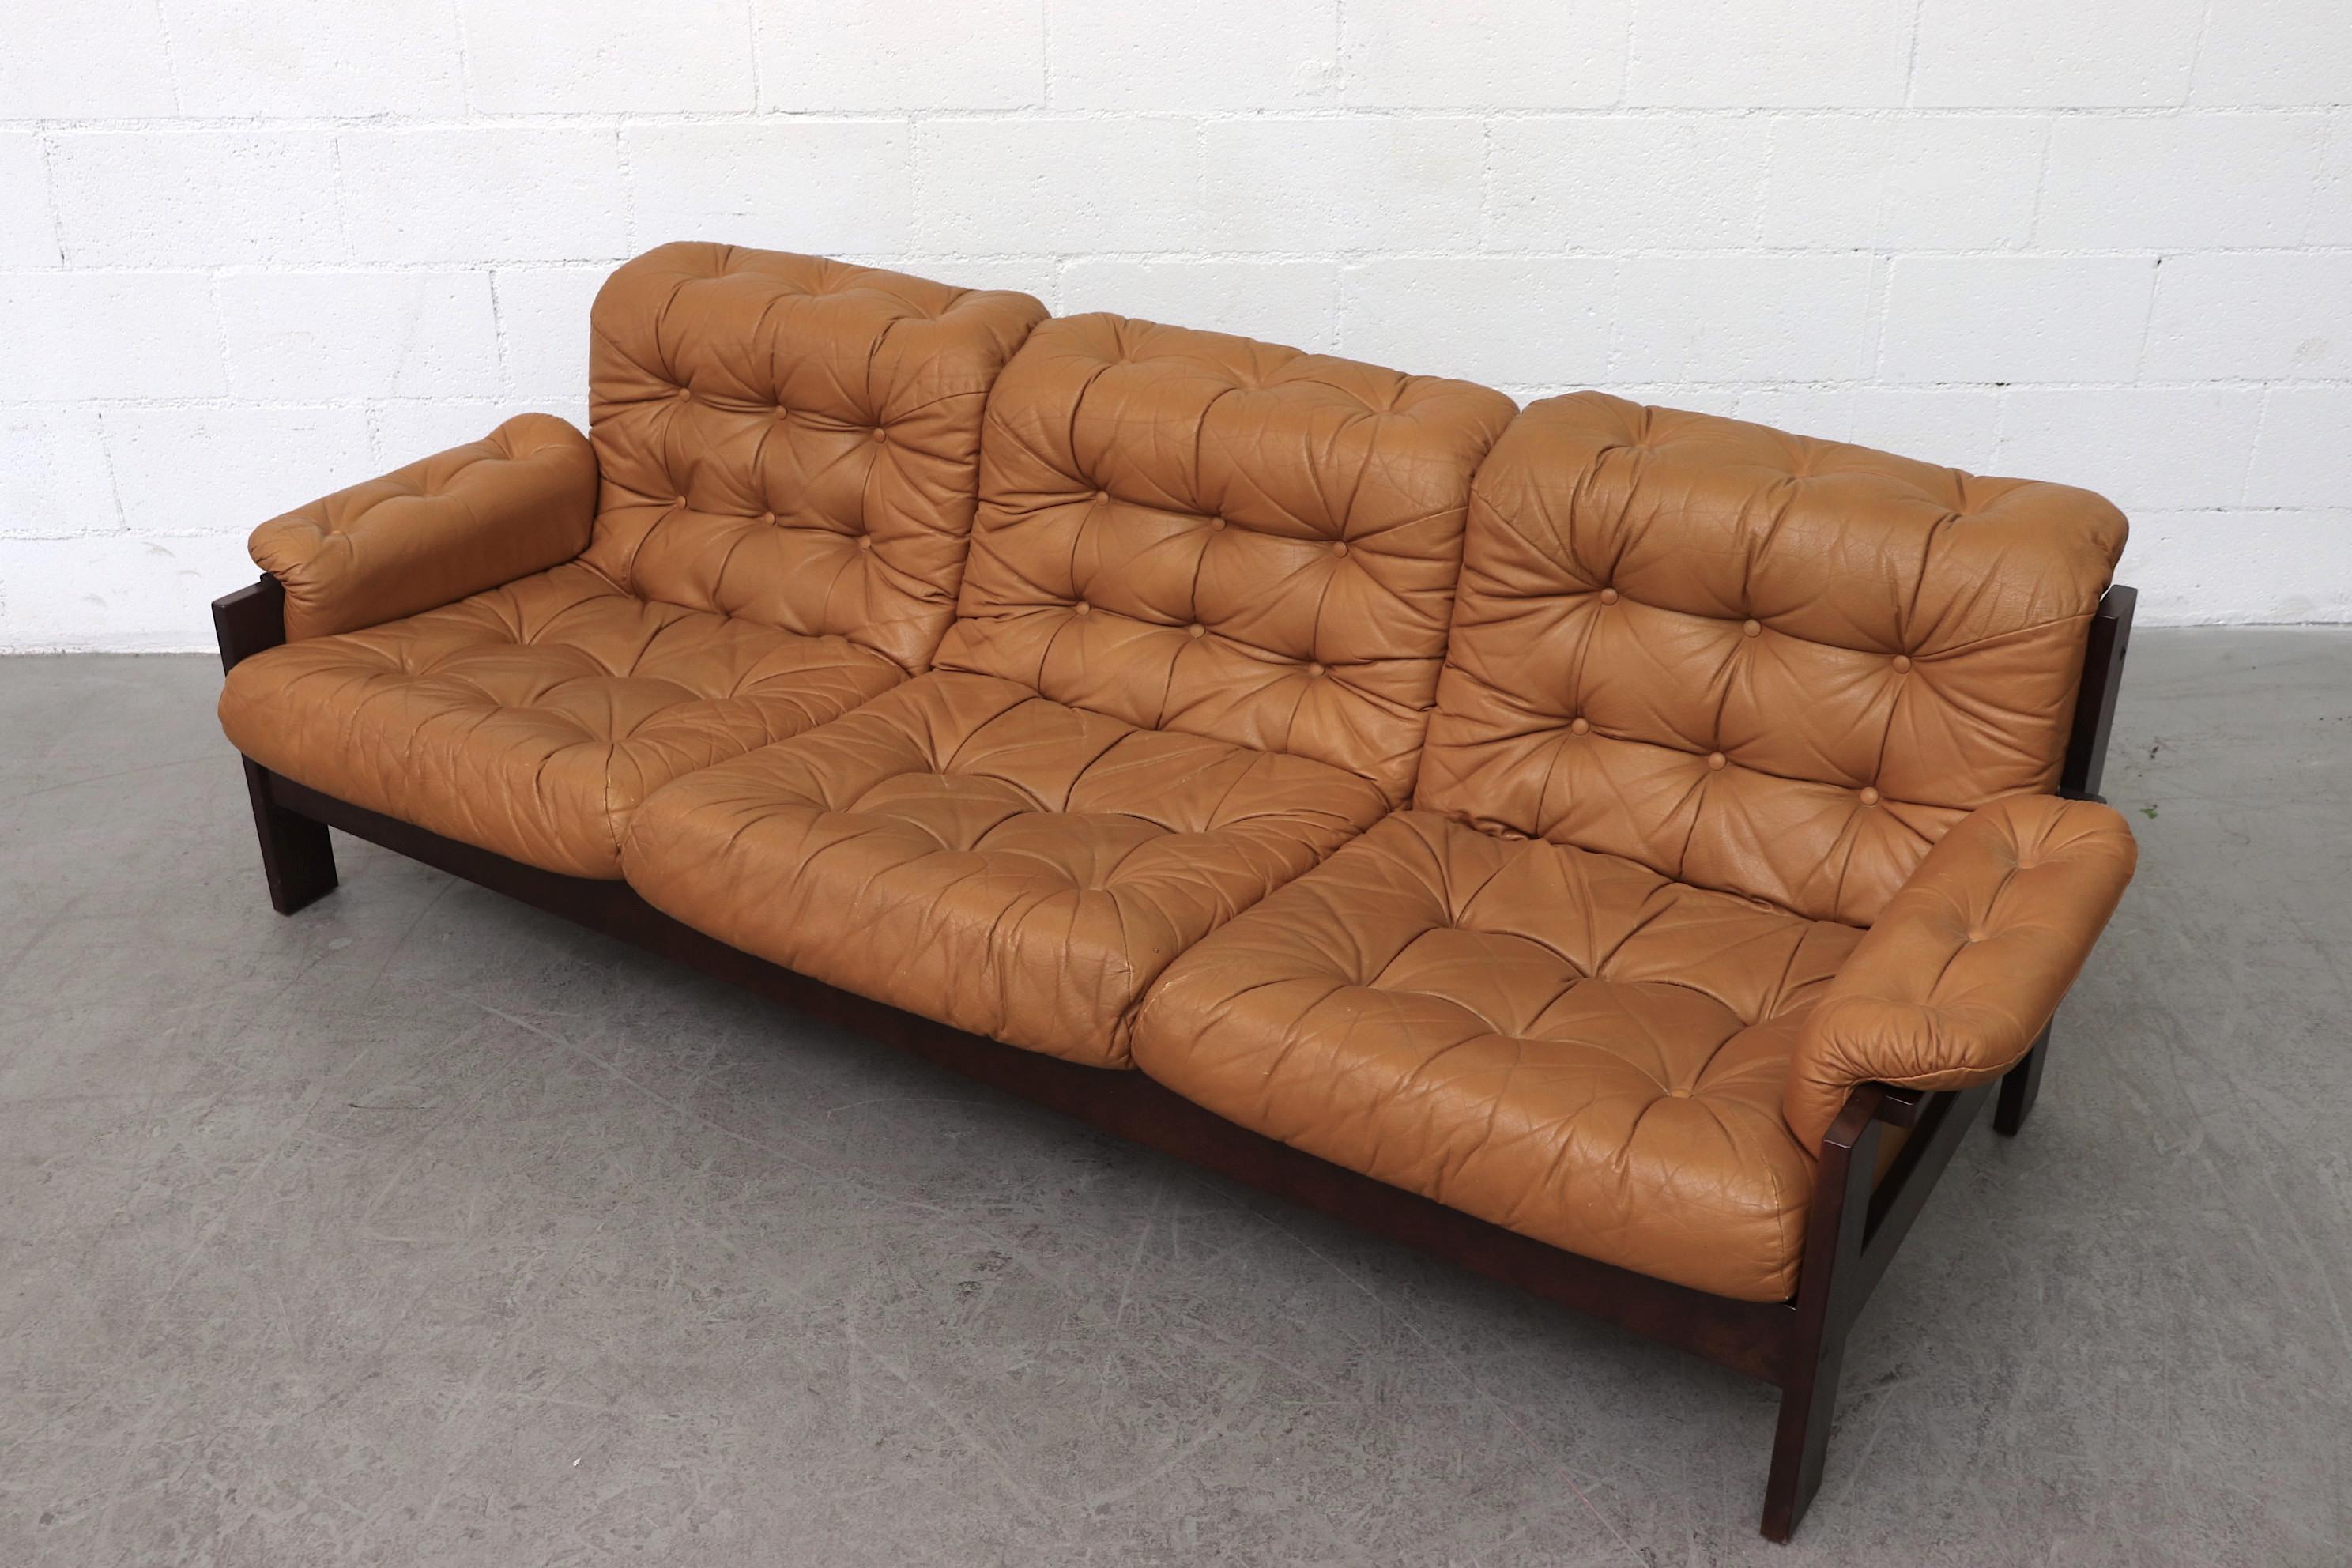 Mid-20th Century Arne Norell Inspired Butterscotch Tufted Leather Sofa for llums Bolighus